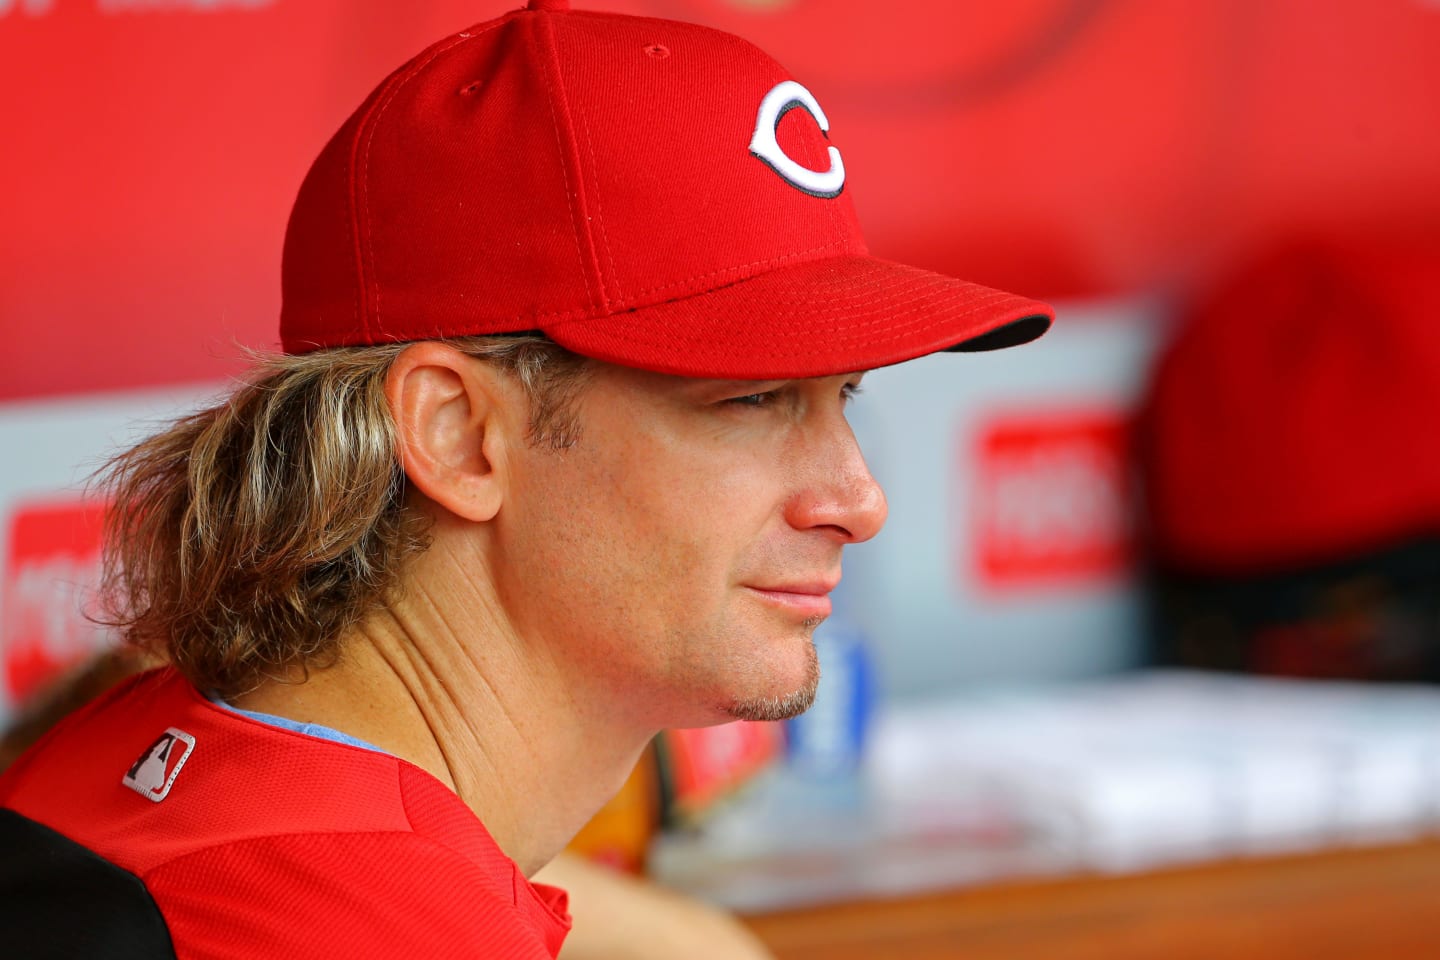 Bronson Arroyo anxious to sign on the dotted line - ESPN